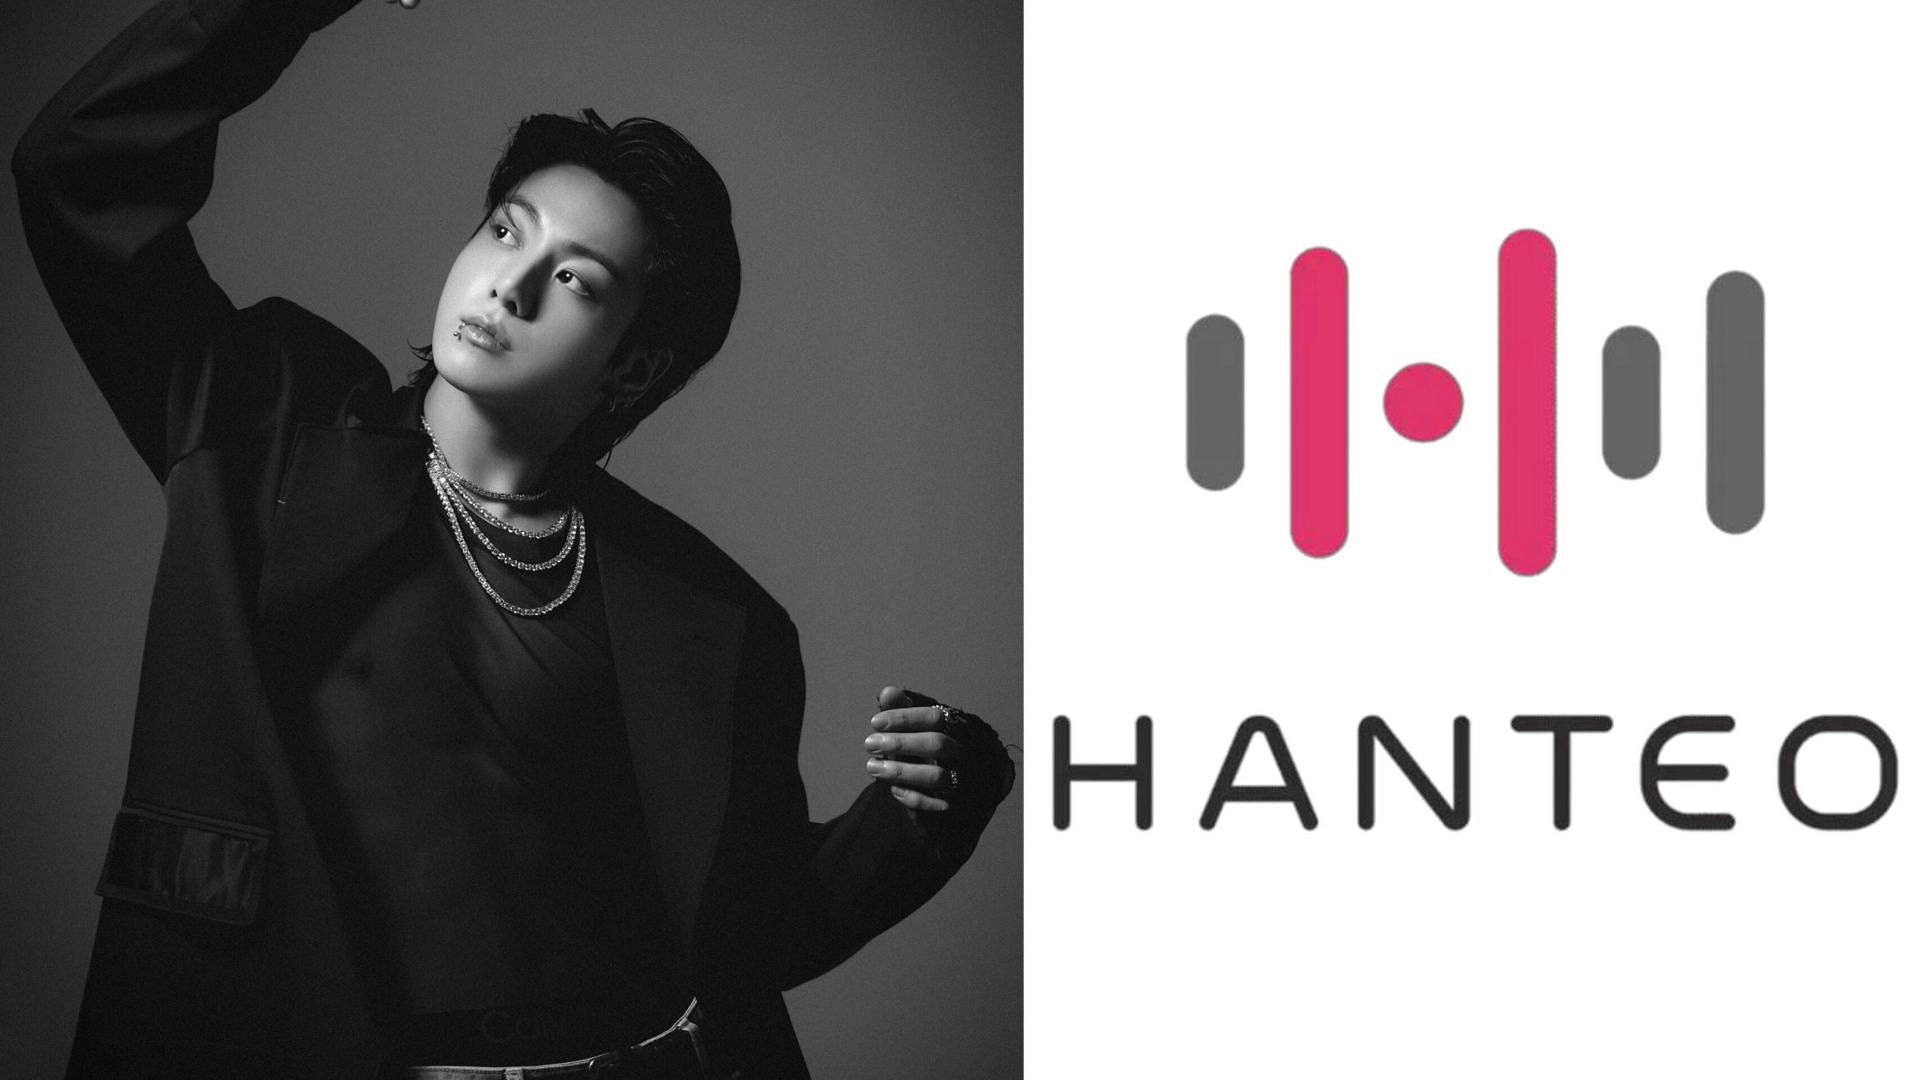 BTS Jungkook wins first place in the US Country Hanteo Chart (Images via X/@bts_bighit and Hanteo chart website)